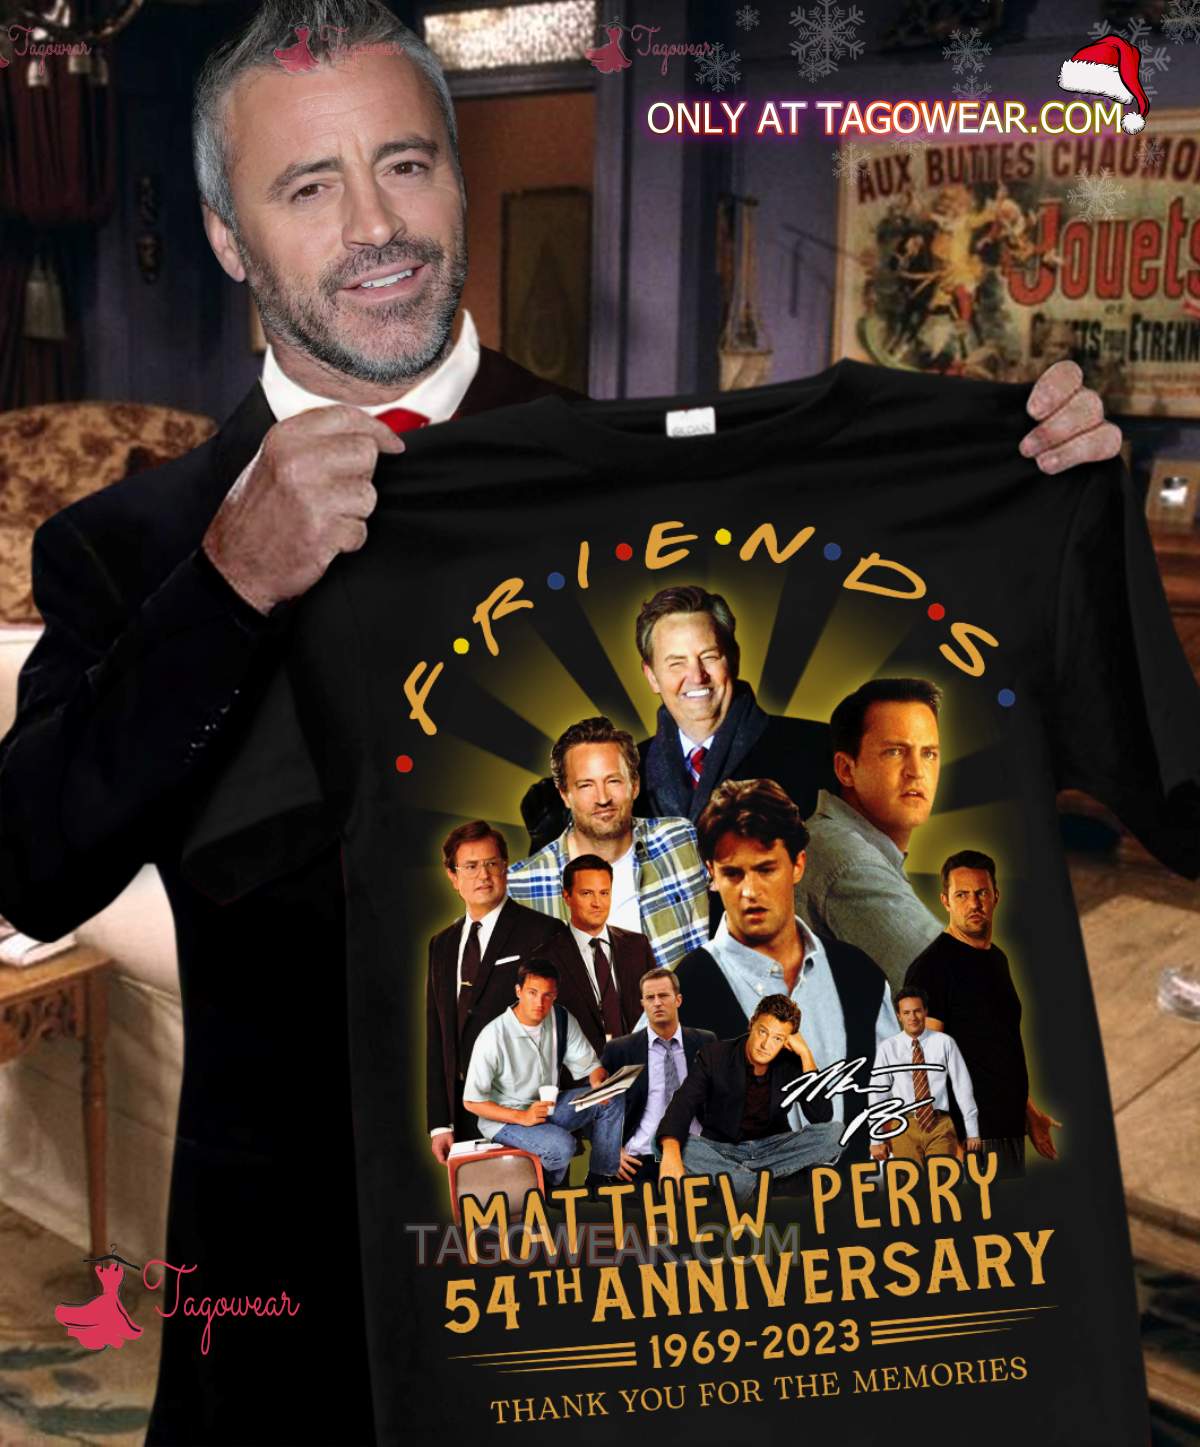 Friends Matthew Perry 54th Anniversary 1969-2023 Thank You For The Memories Shirt